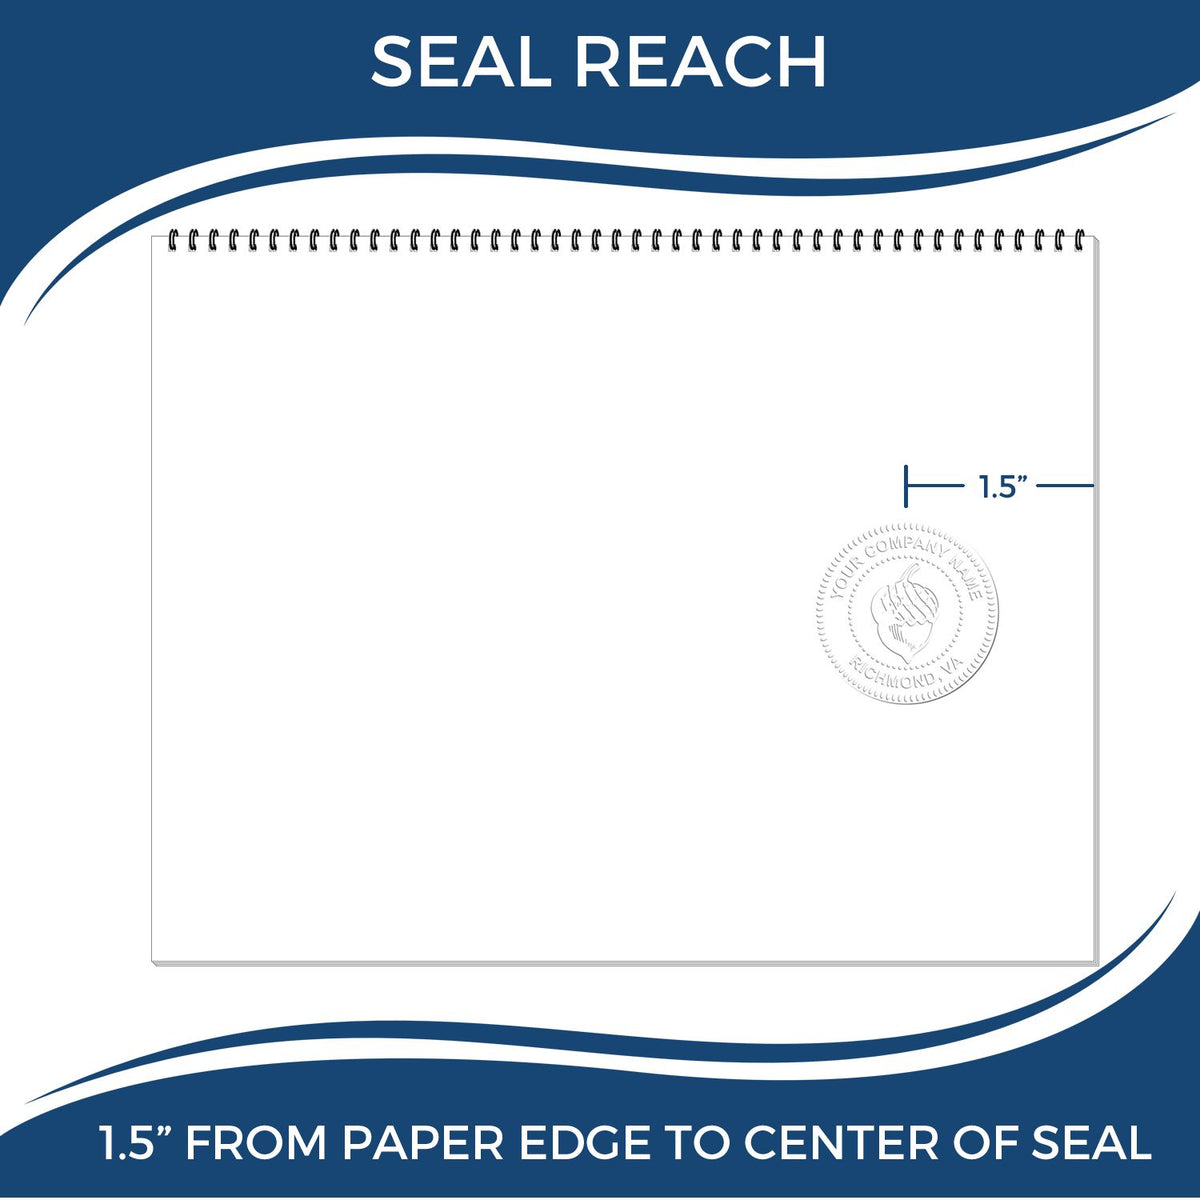 An infographic showing the seal reach which is represented by a ruler and a miniature seal image of the Gift Maryland Landscape Architect Seal